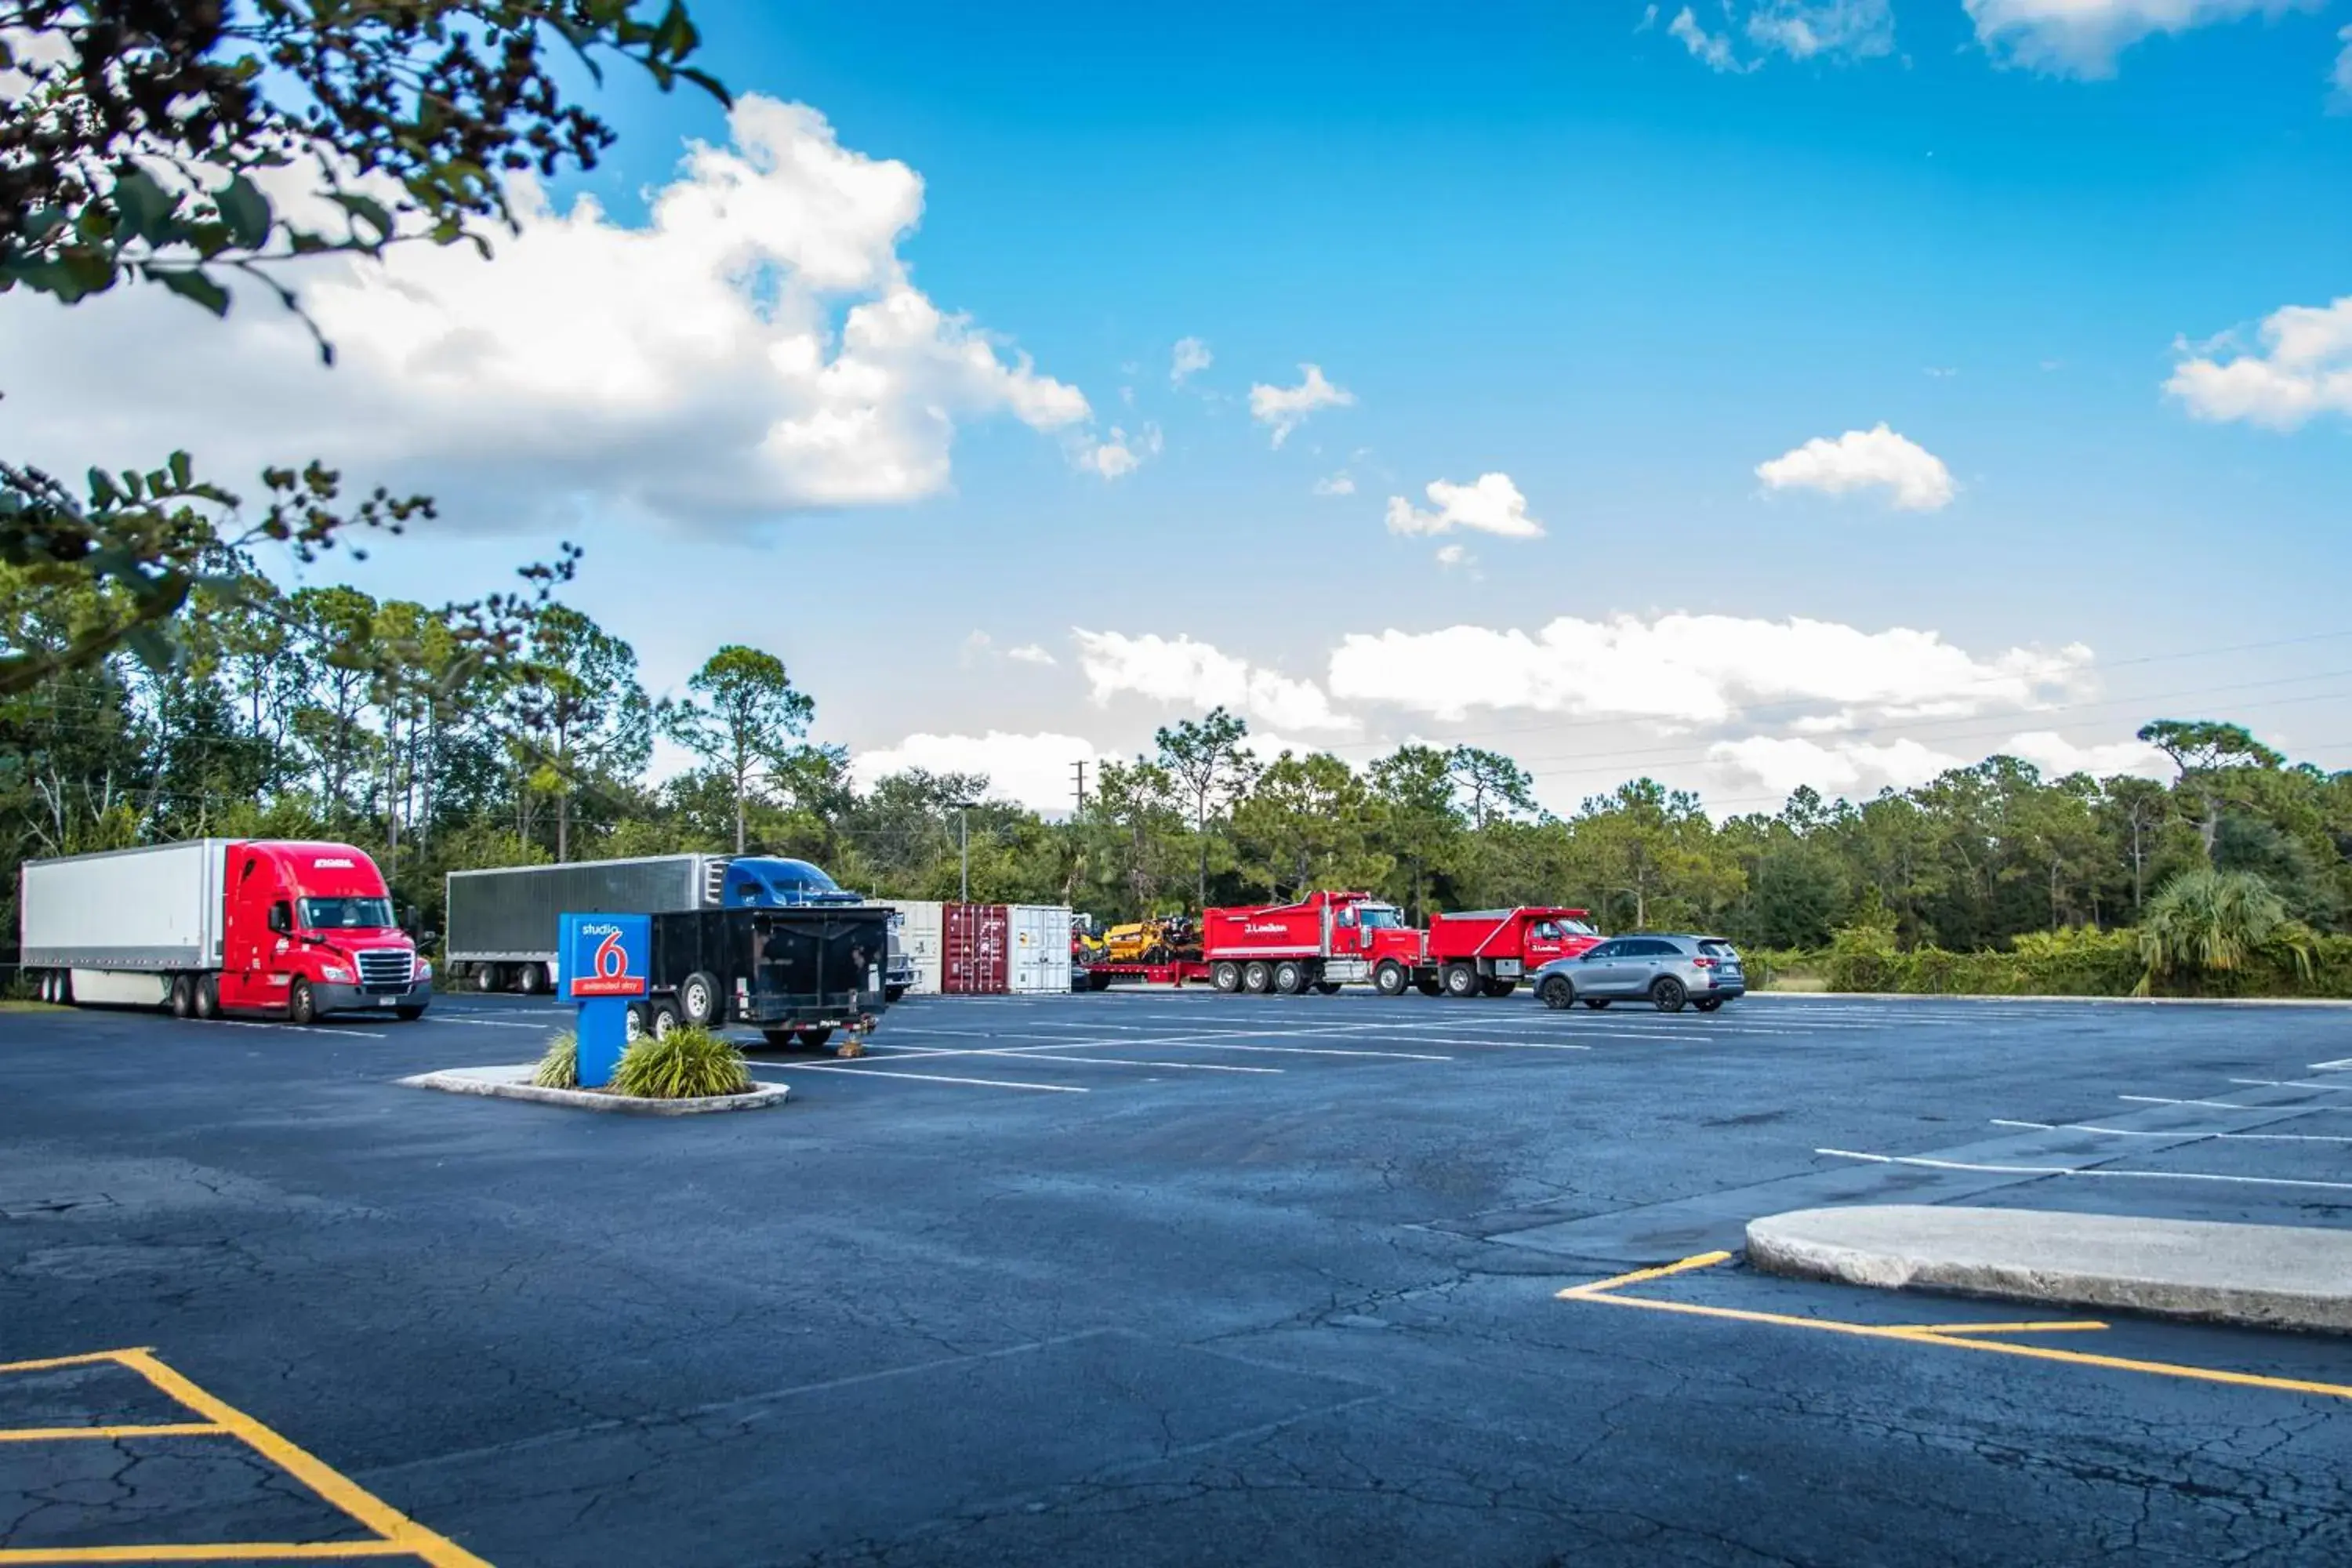 Property building in Motel 6-Kissimmee, FL - Orlando